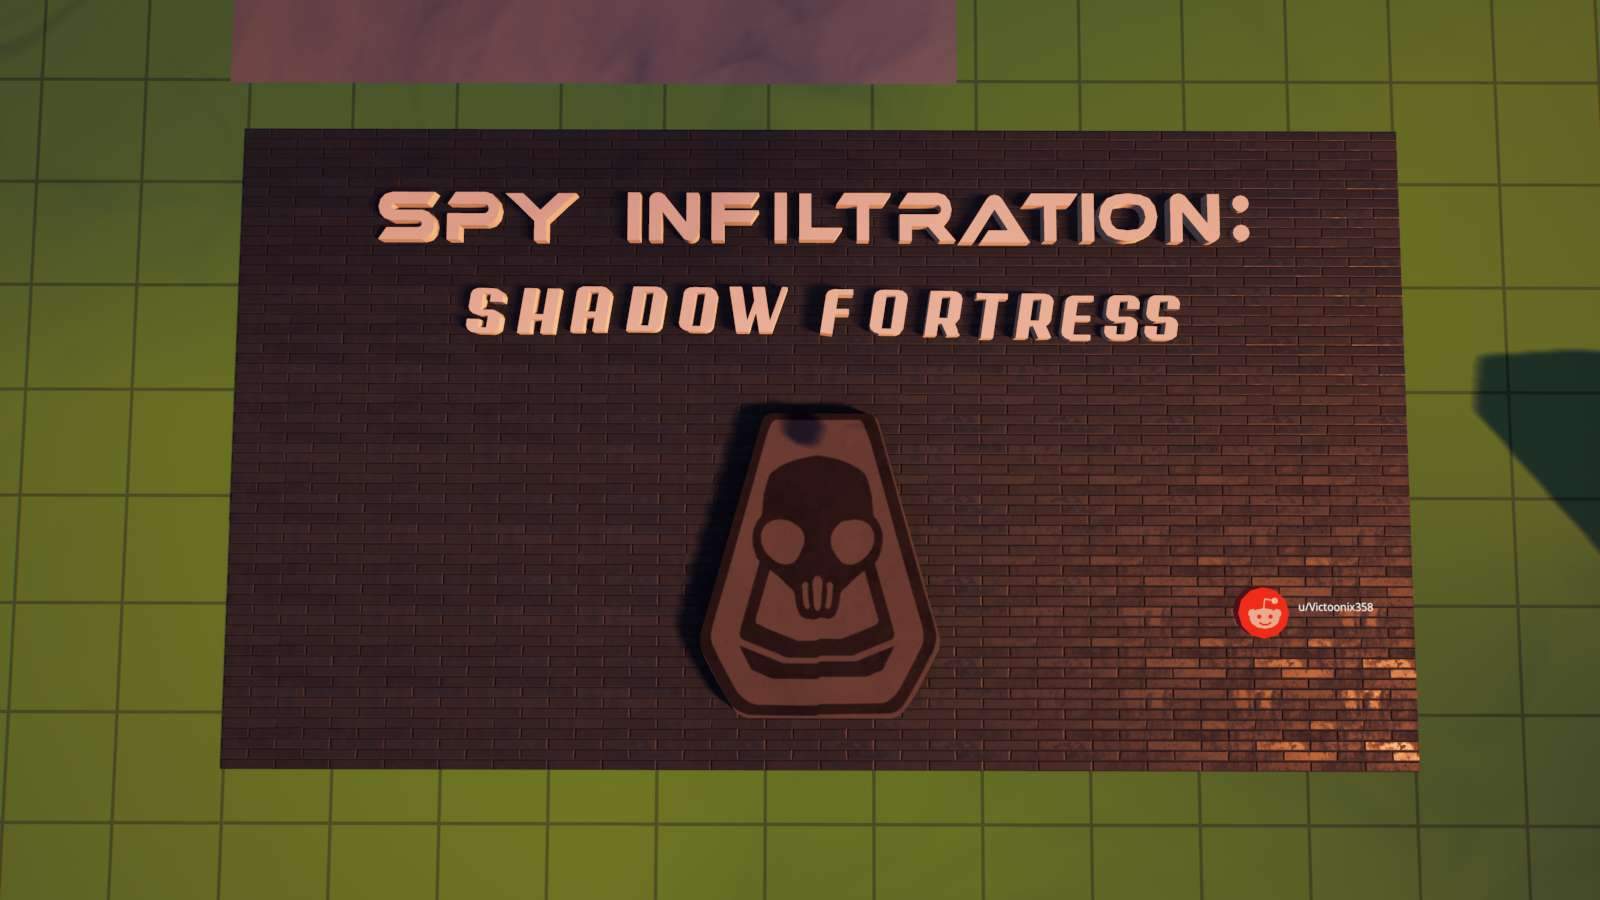 SPY INFILTRATION: SHADOW FORTRESS